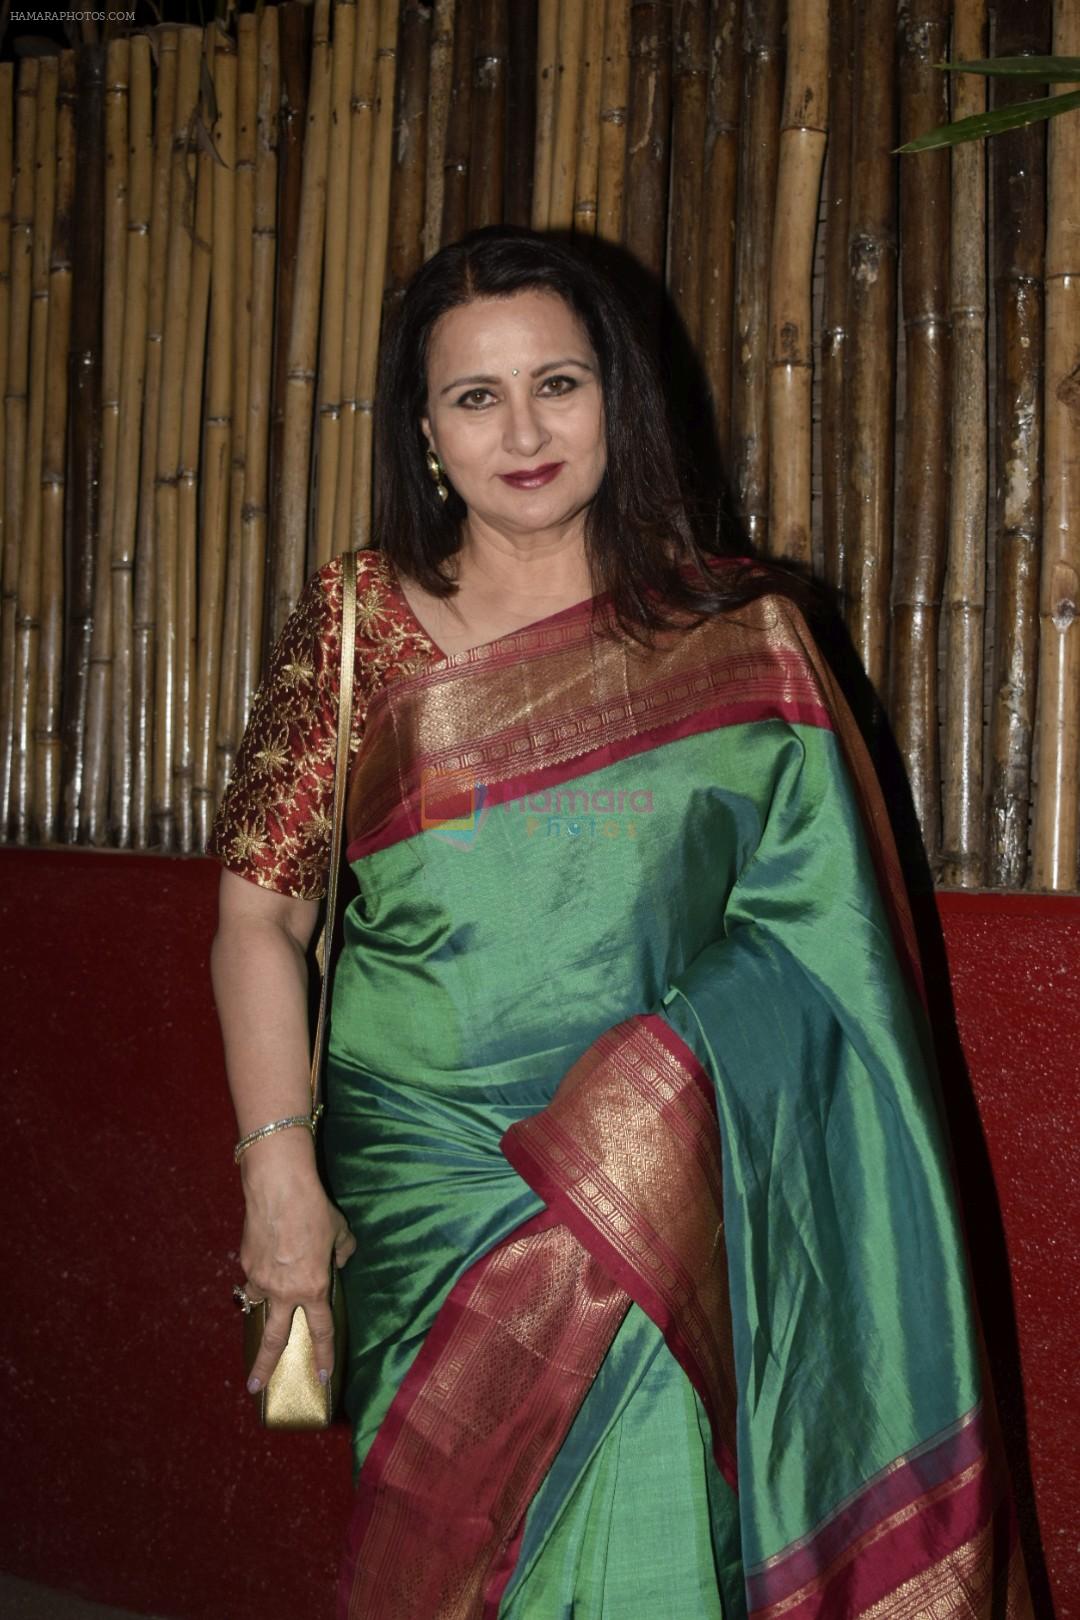 Poonam Dhillon at Kaifi Azmi's centenary celebrations with a musical evening at his juhu residence on 10th Jan 2019